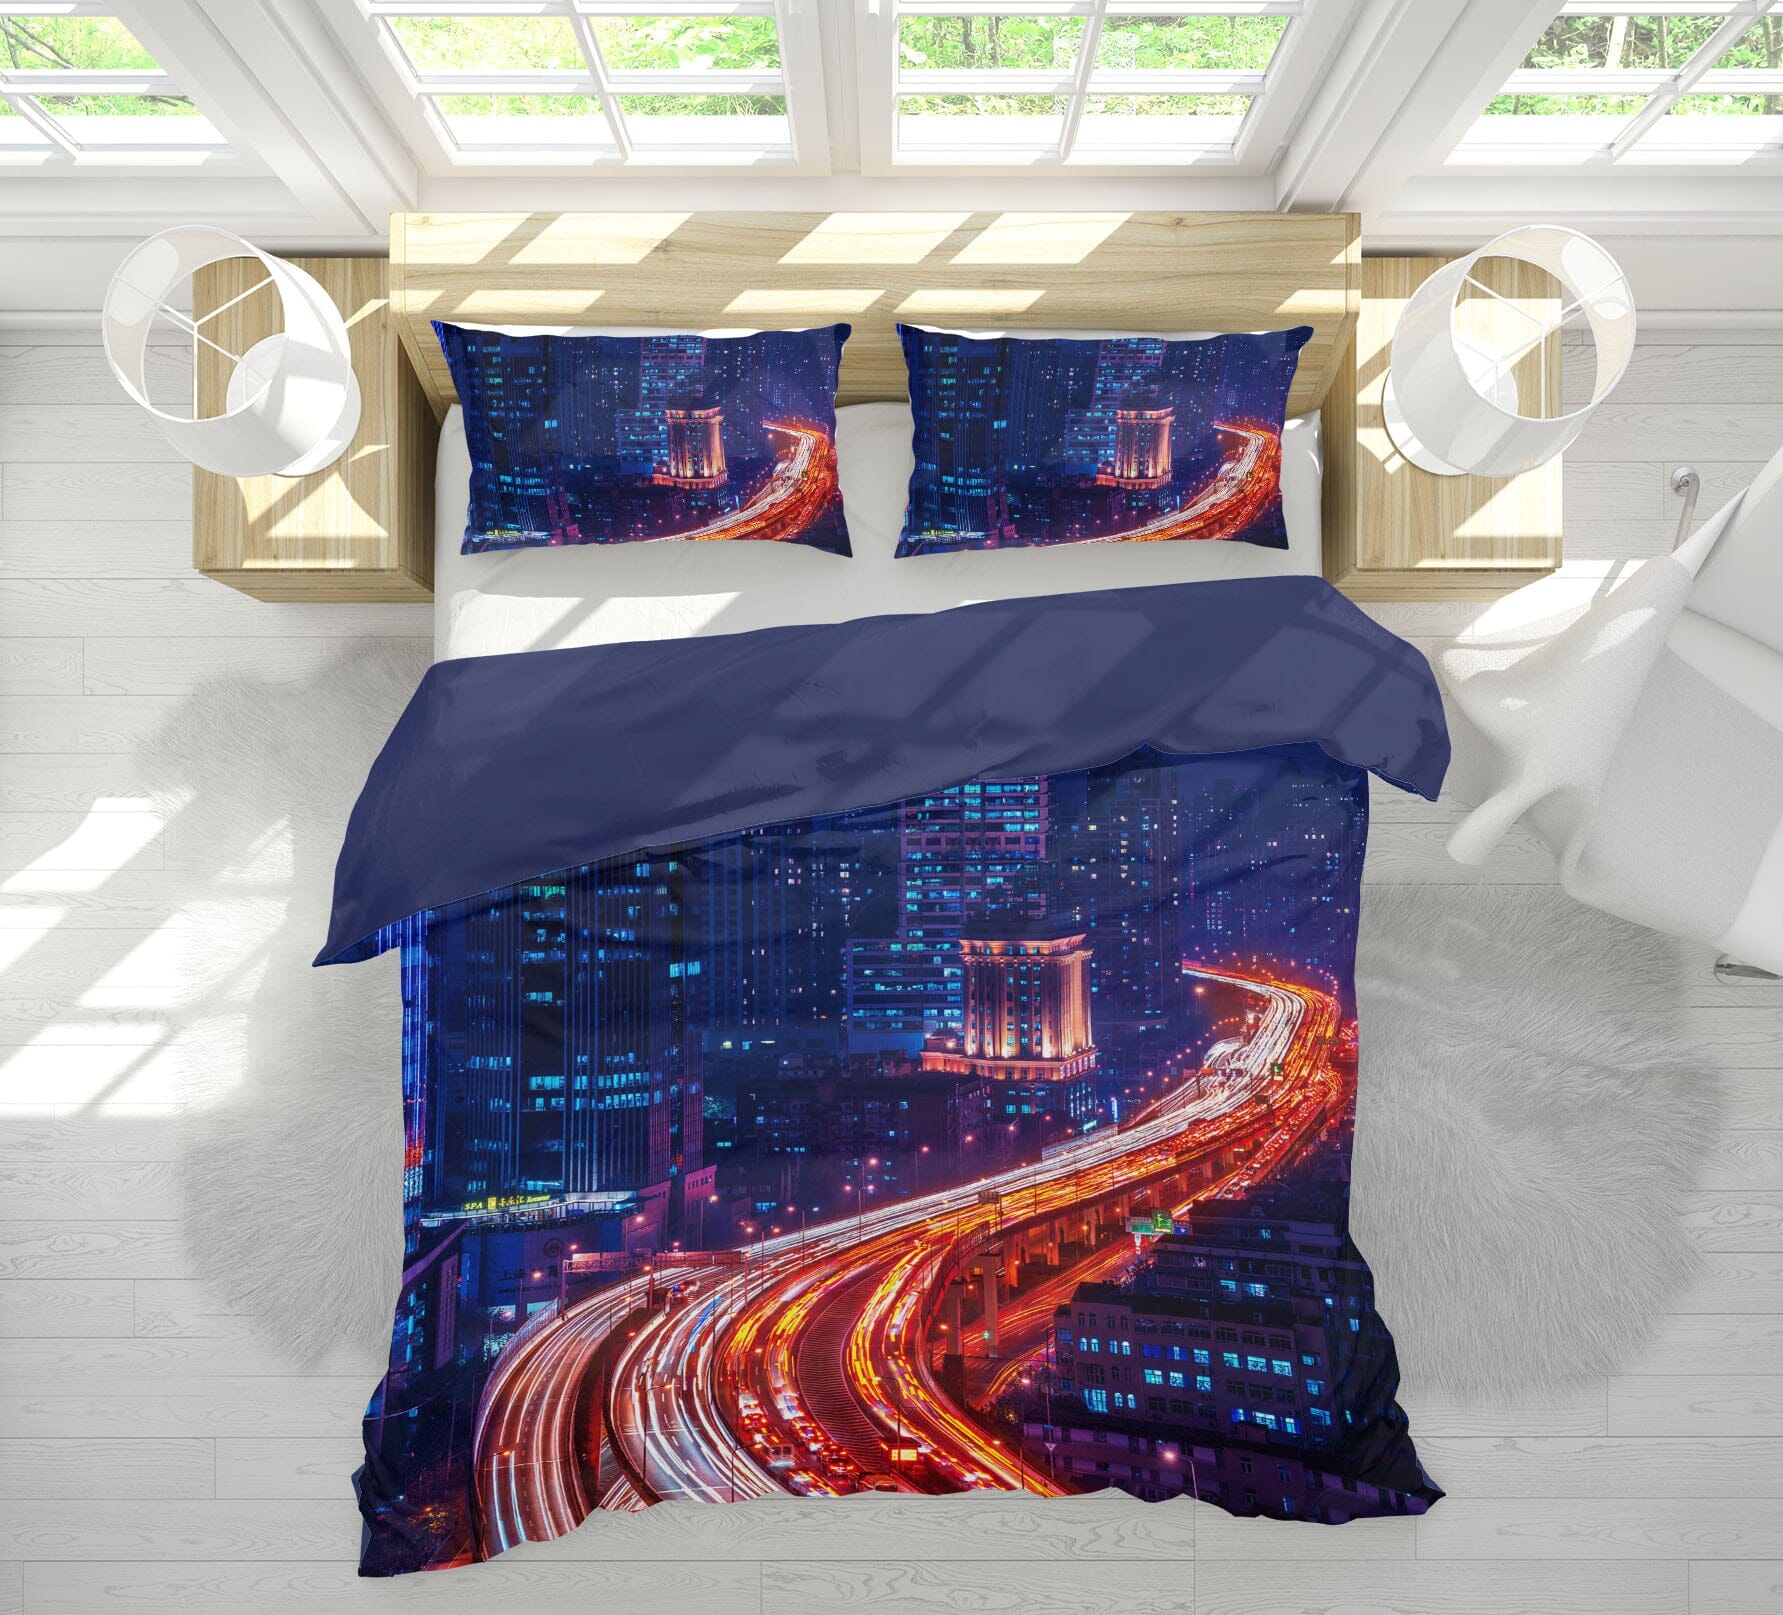 3D Traffic Jam 2121 Marco Carmassi Bedding Bed Pillowcases Quilt Quiet Covers AJ Creativity Home 